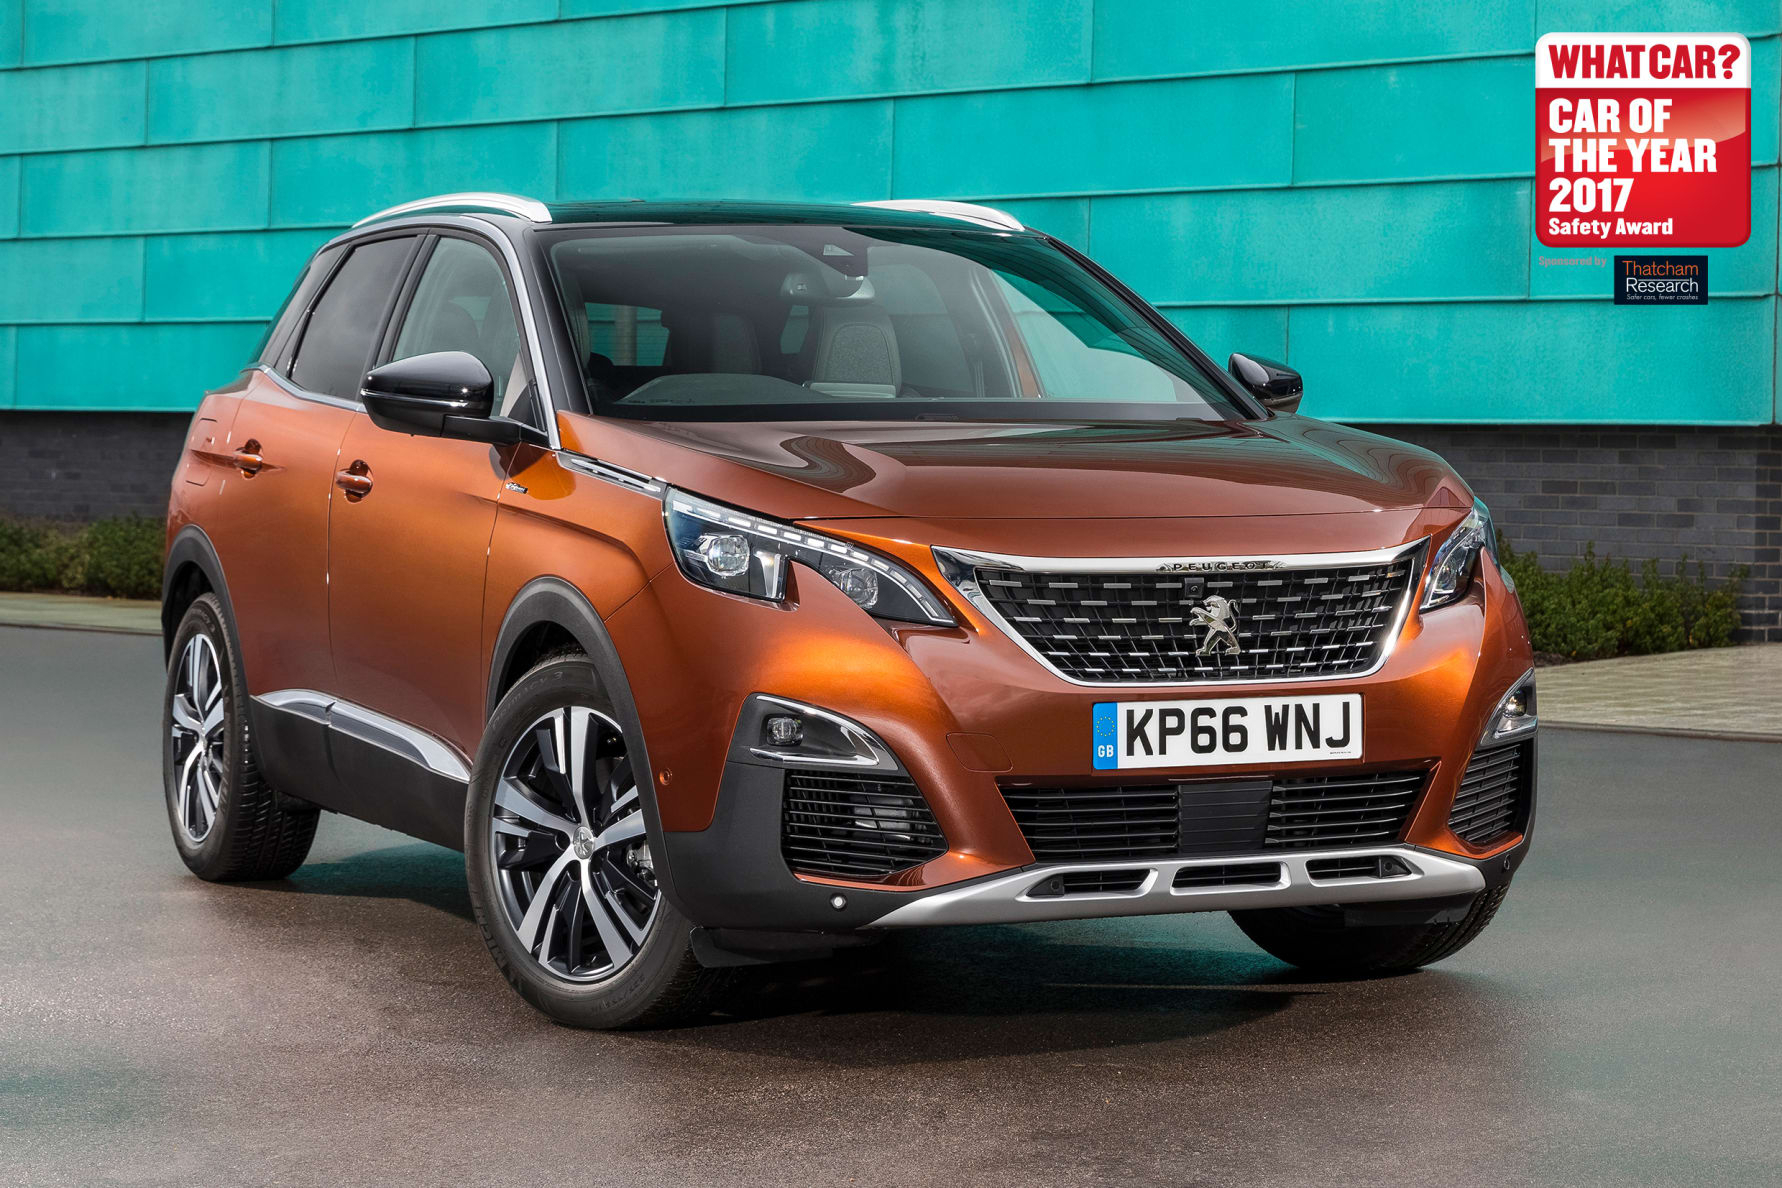 Peugeot 3008 - Thatcham Research sponsored What Car Safety Award 2017 Runner-Up